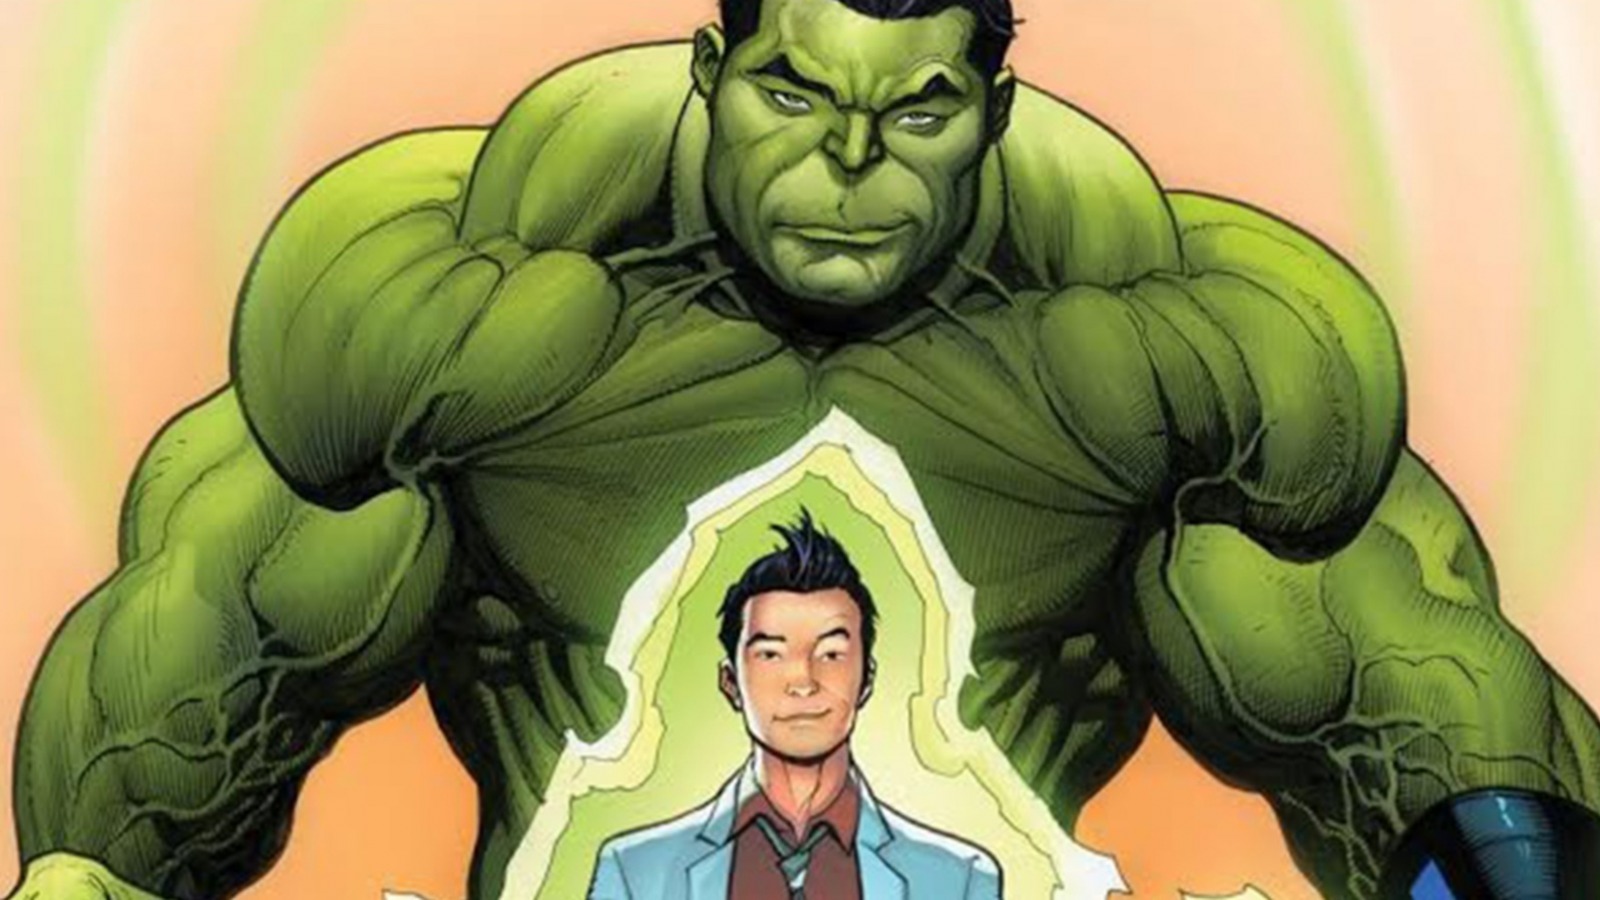 How We Could Get Totally Awesome Hulk In The MCU